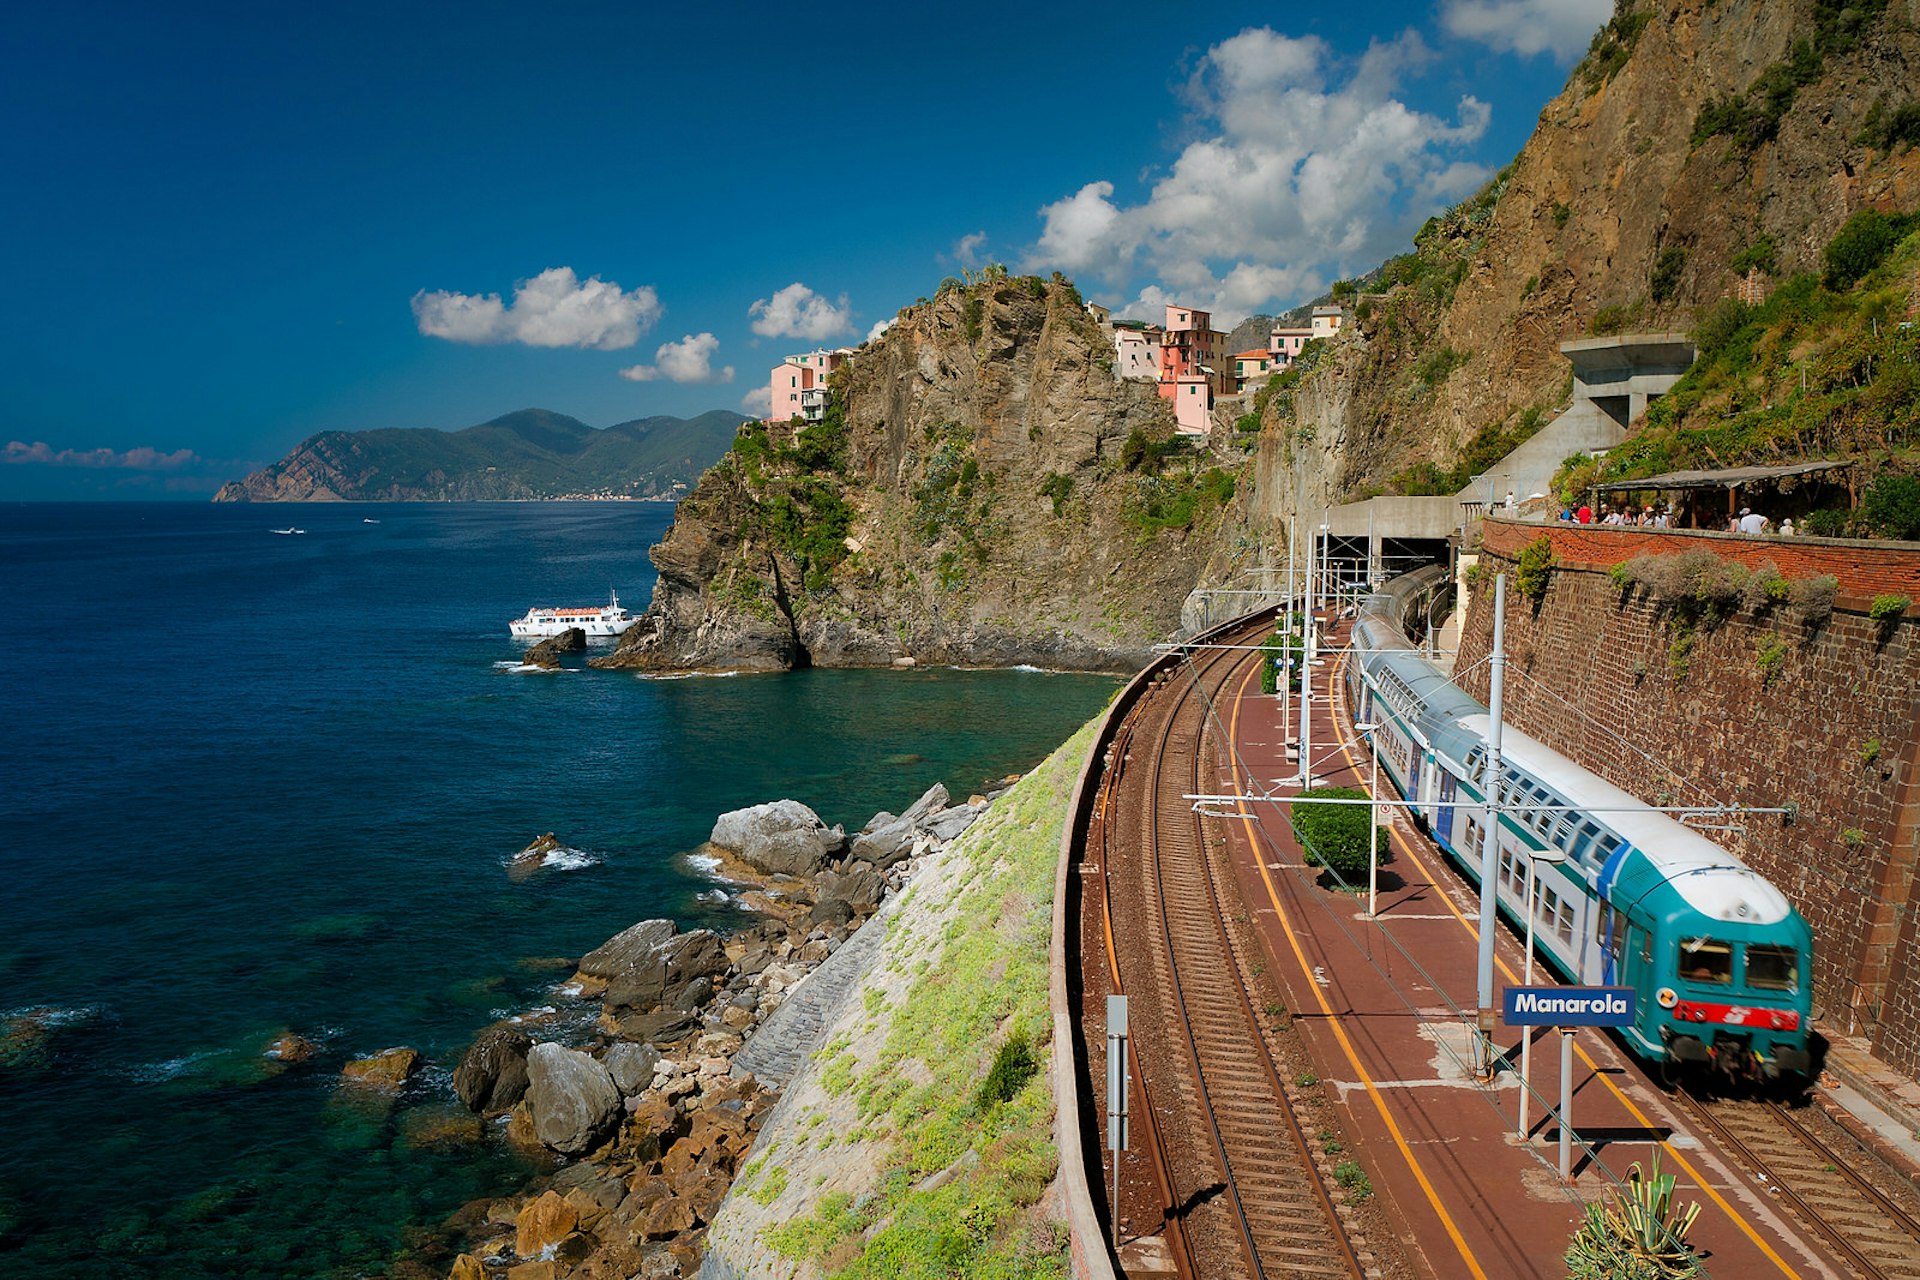 The best way to get around the Cinque Terre's spectacular coastline is by train